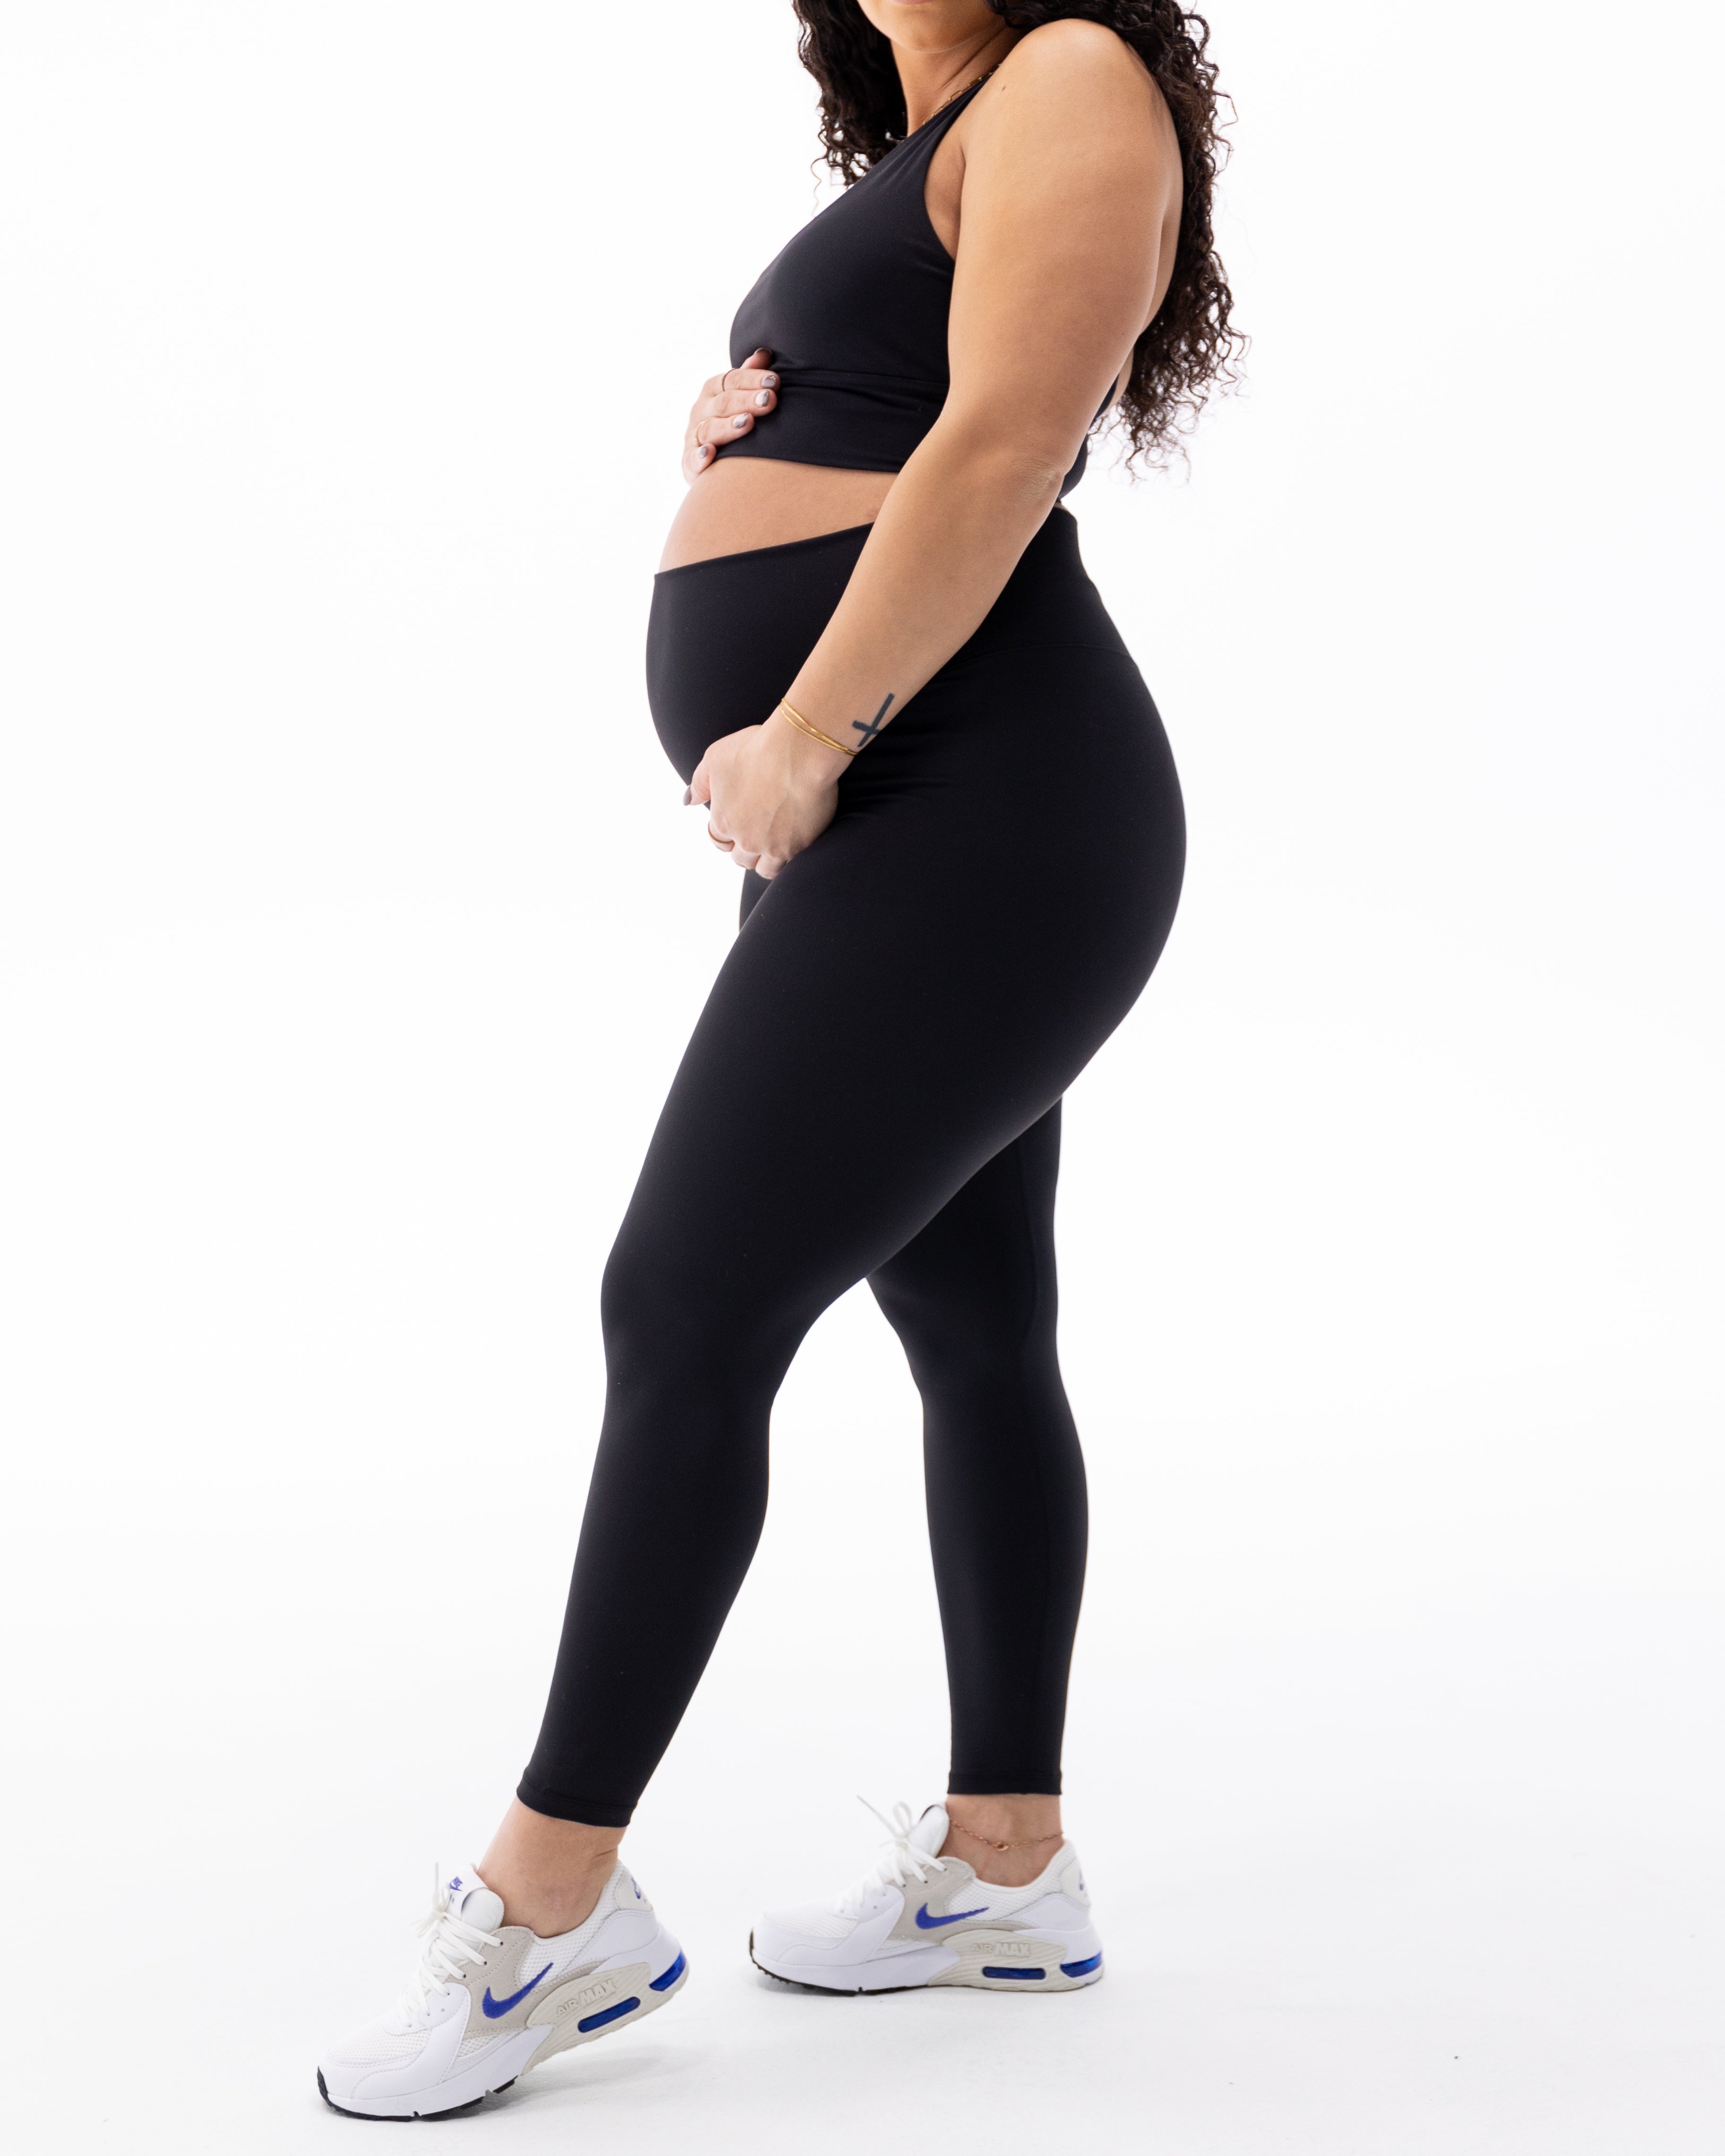 Carriwell Maternity Support Leggings Black - The Kiddie Company